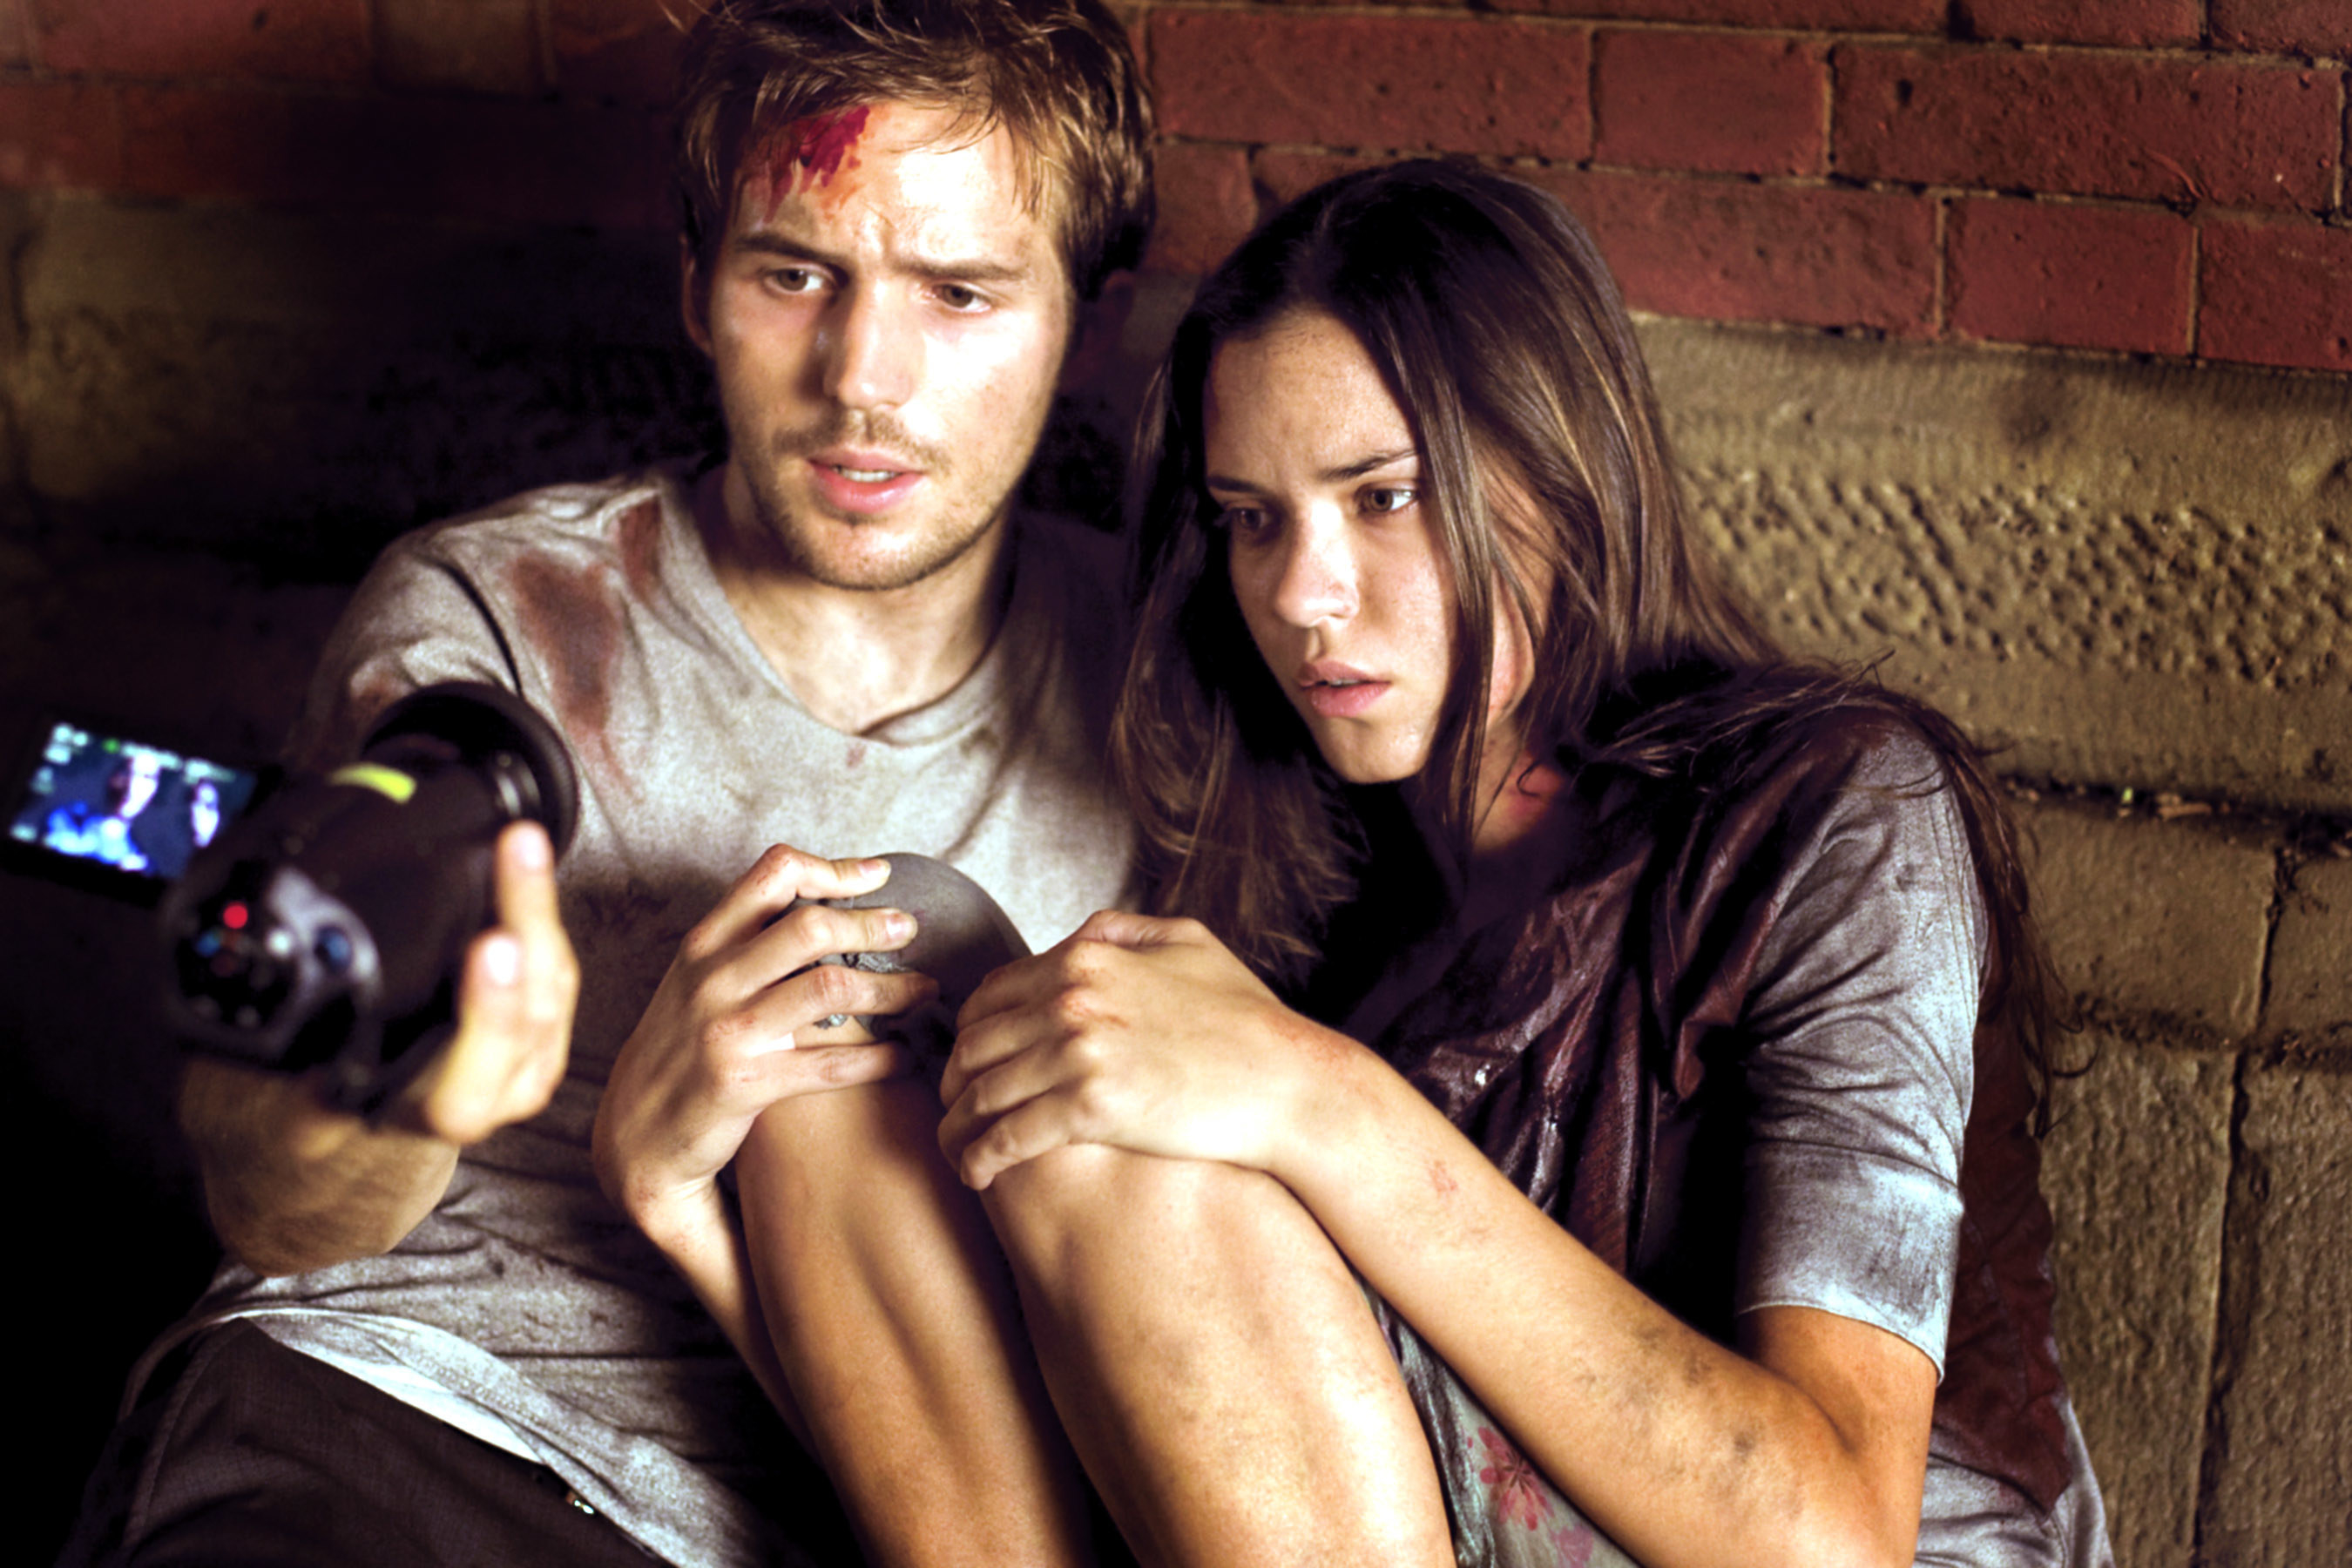 Michael Stahl-David and Odette Yustman look into a camera